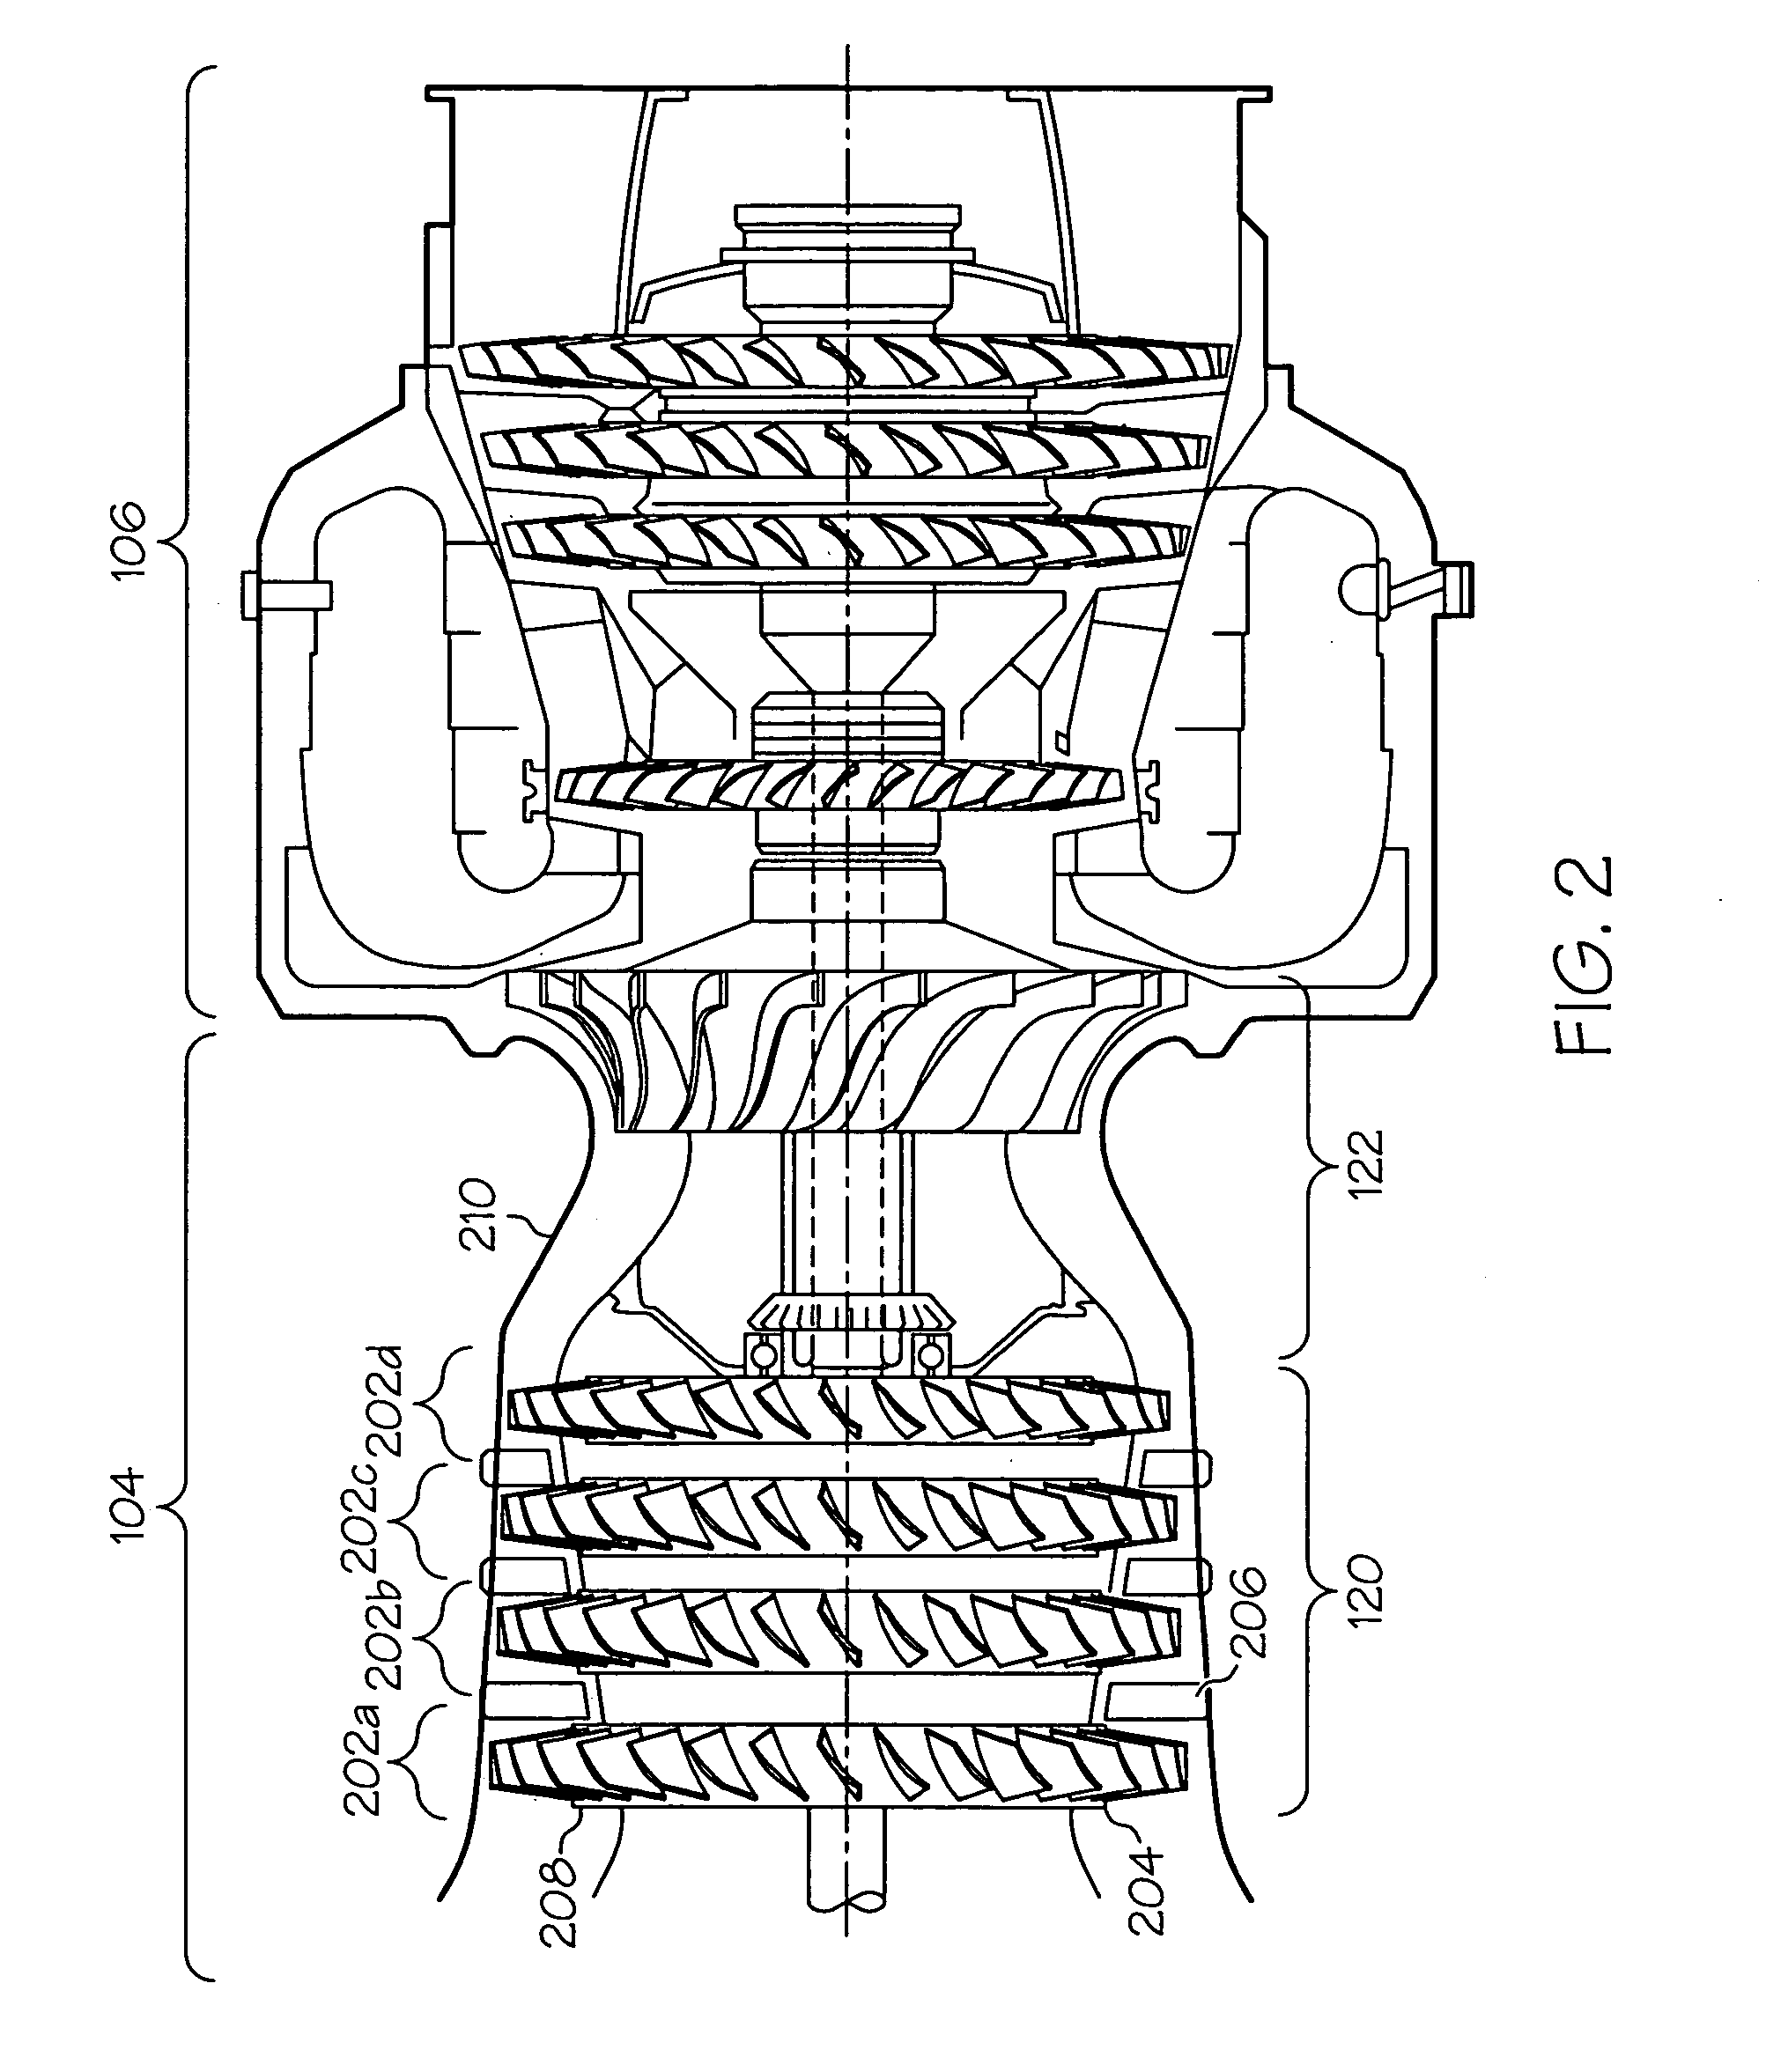 Gas turbine engine electromechanical variable inlet guide vane actuation system